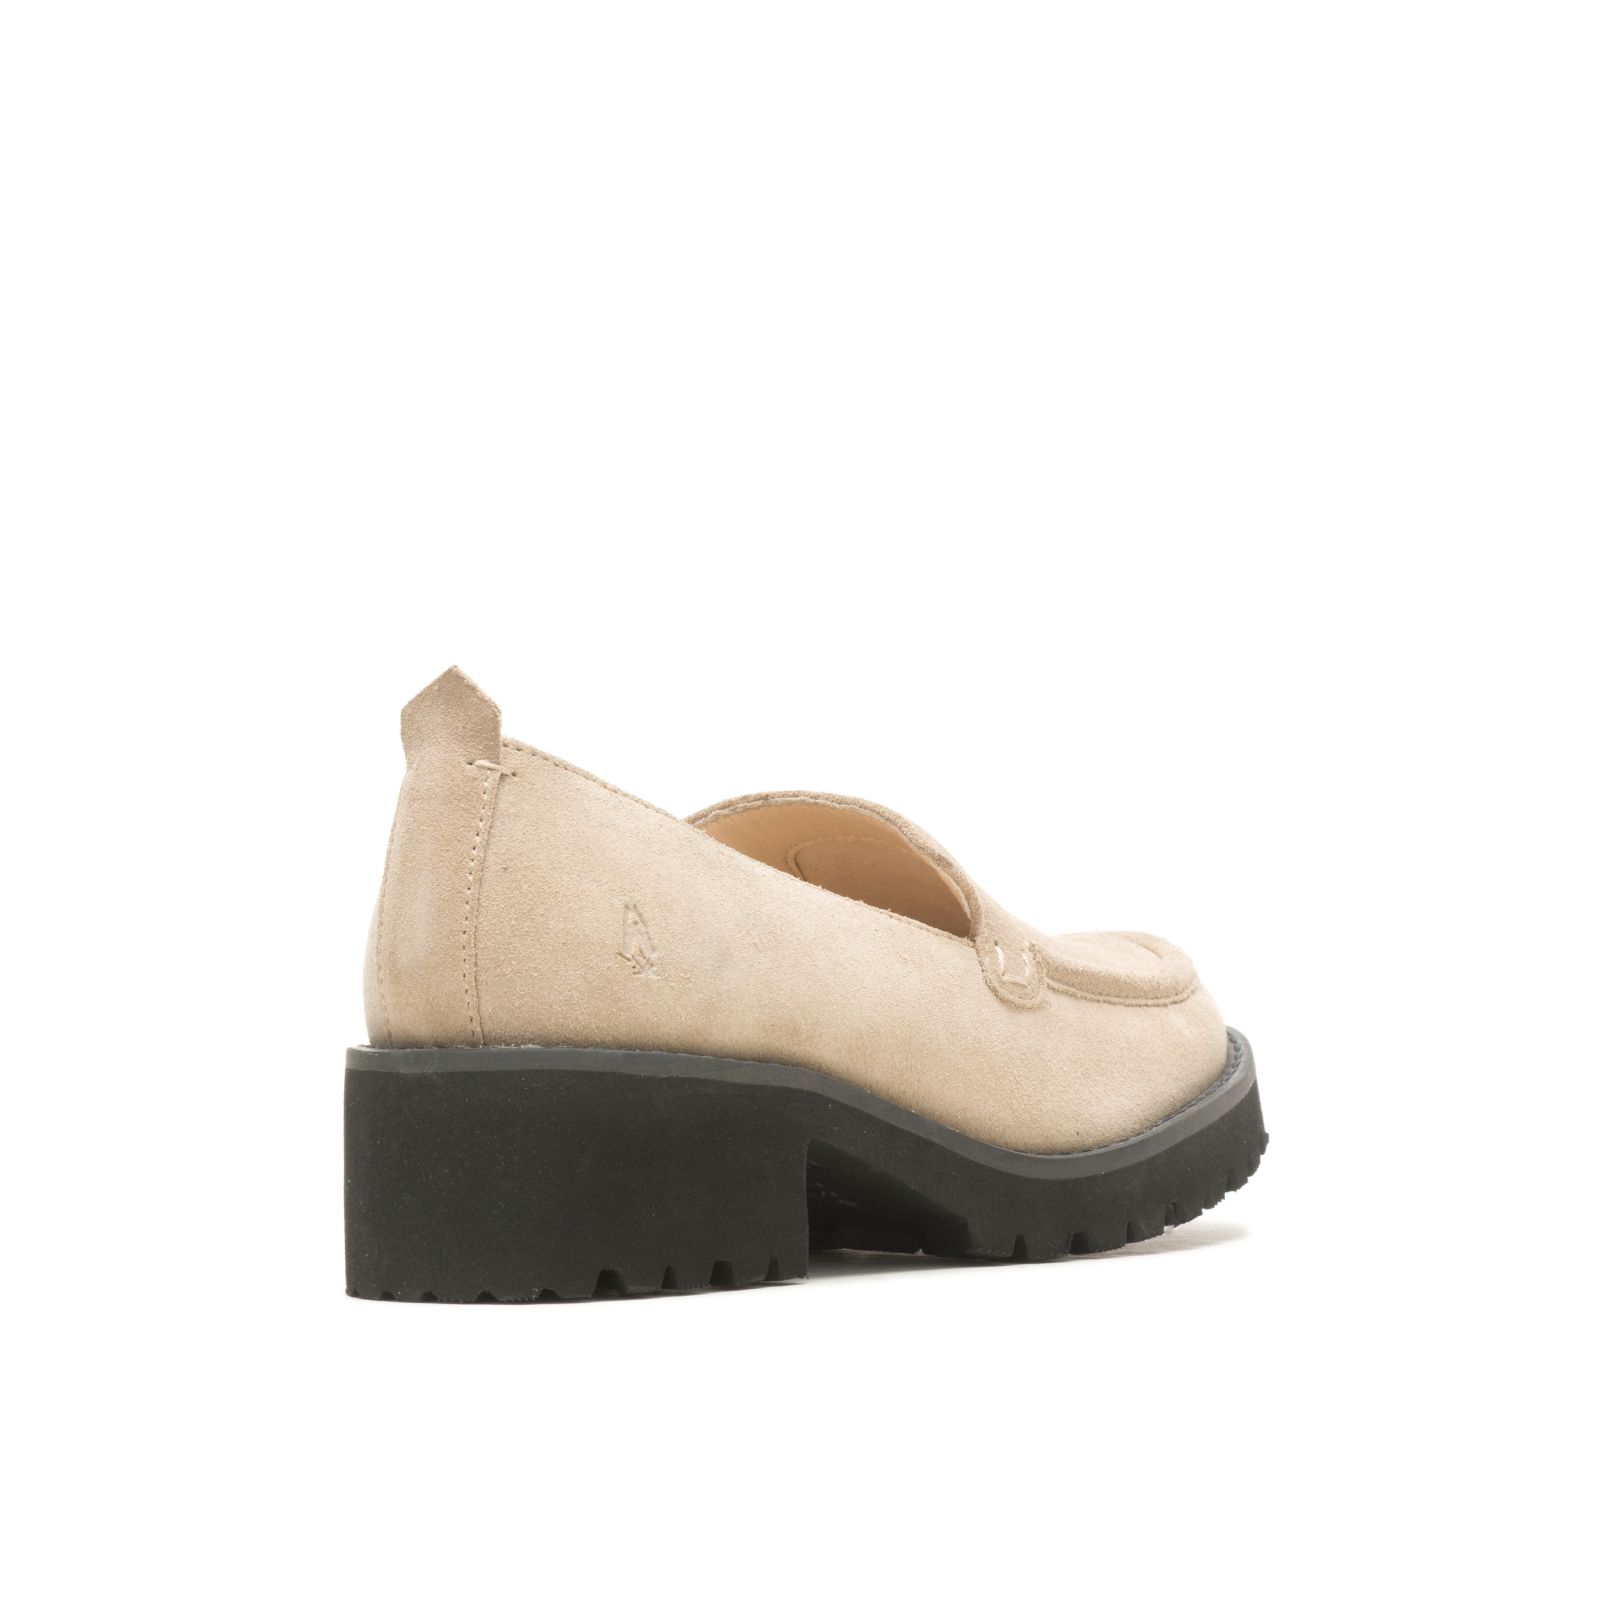 Loafers Hush Puppies Lucy Mujer Grises Marrom | XLIYDBA-18